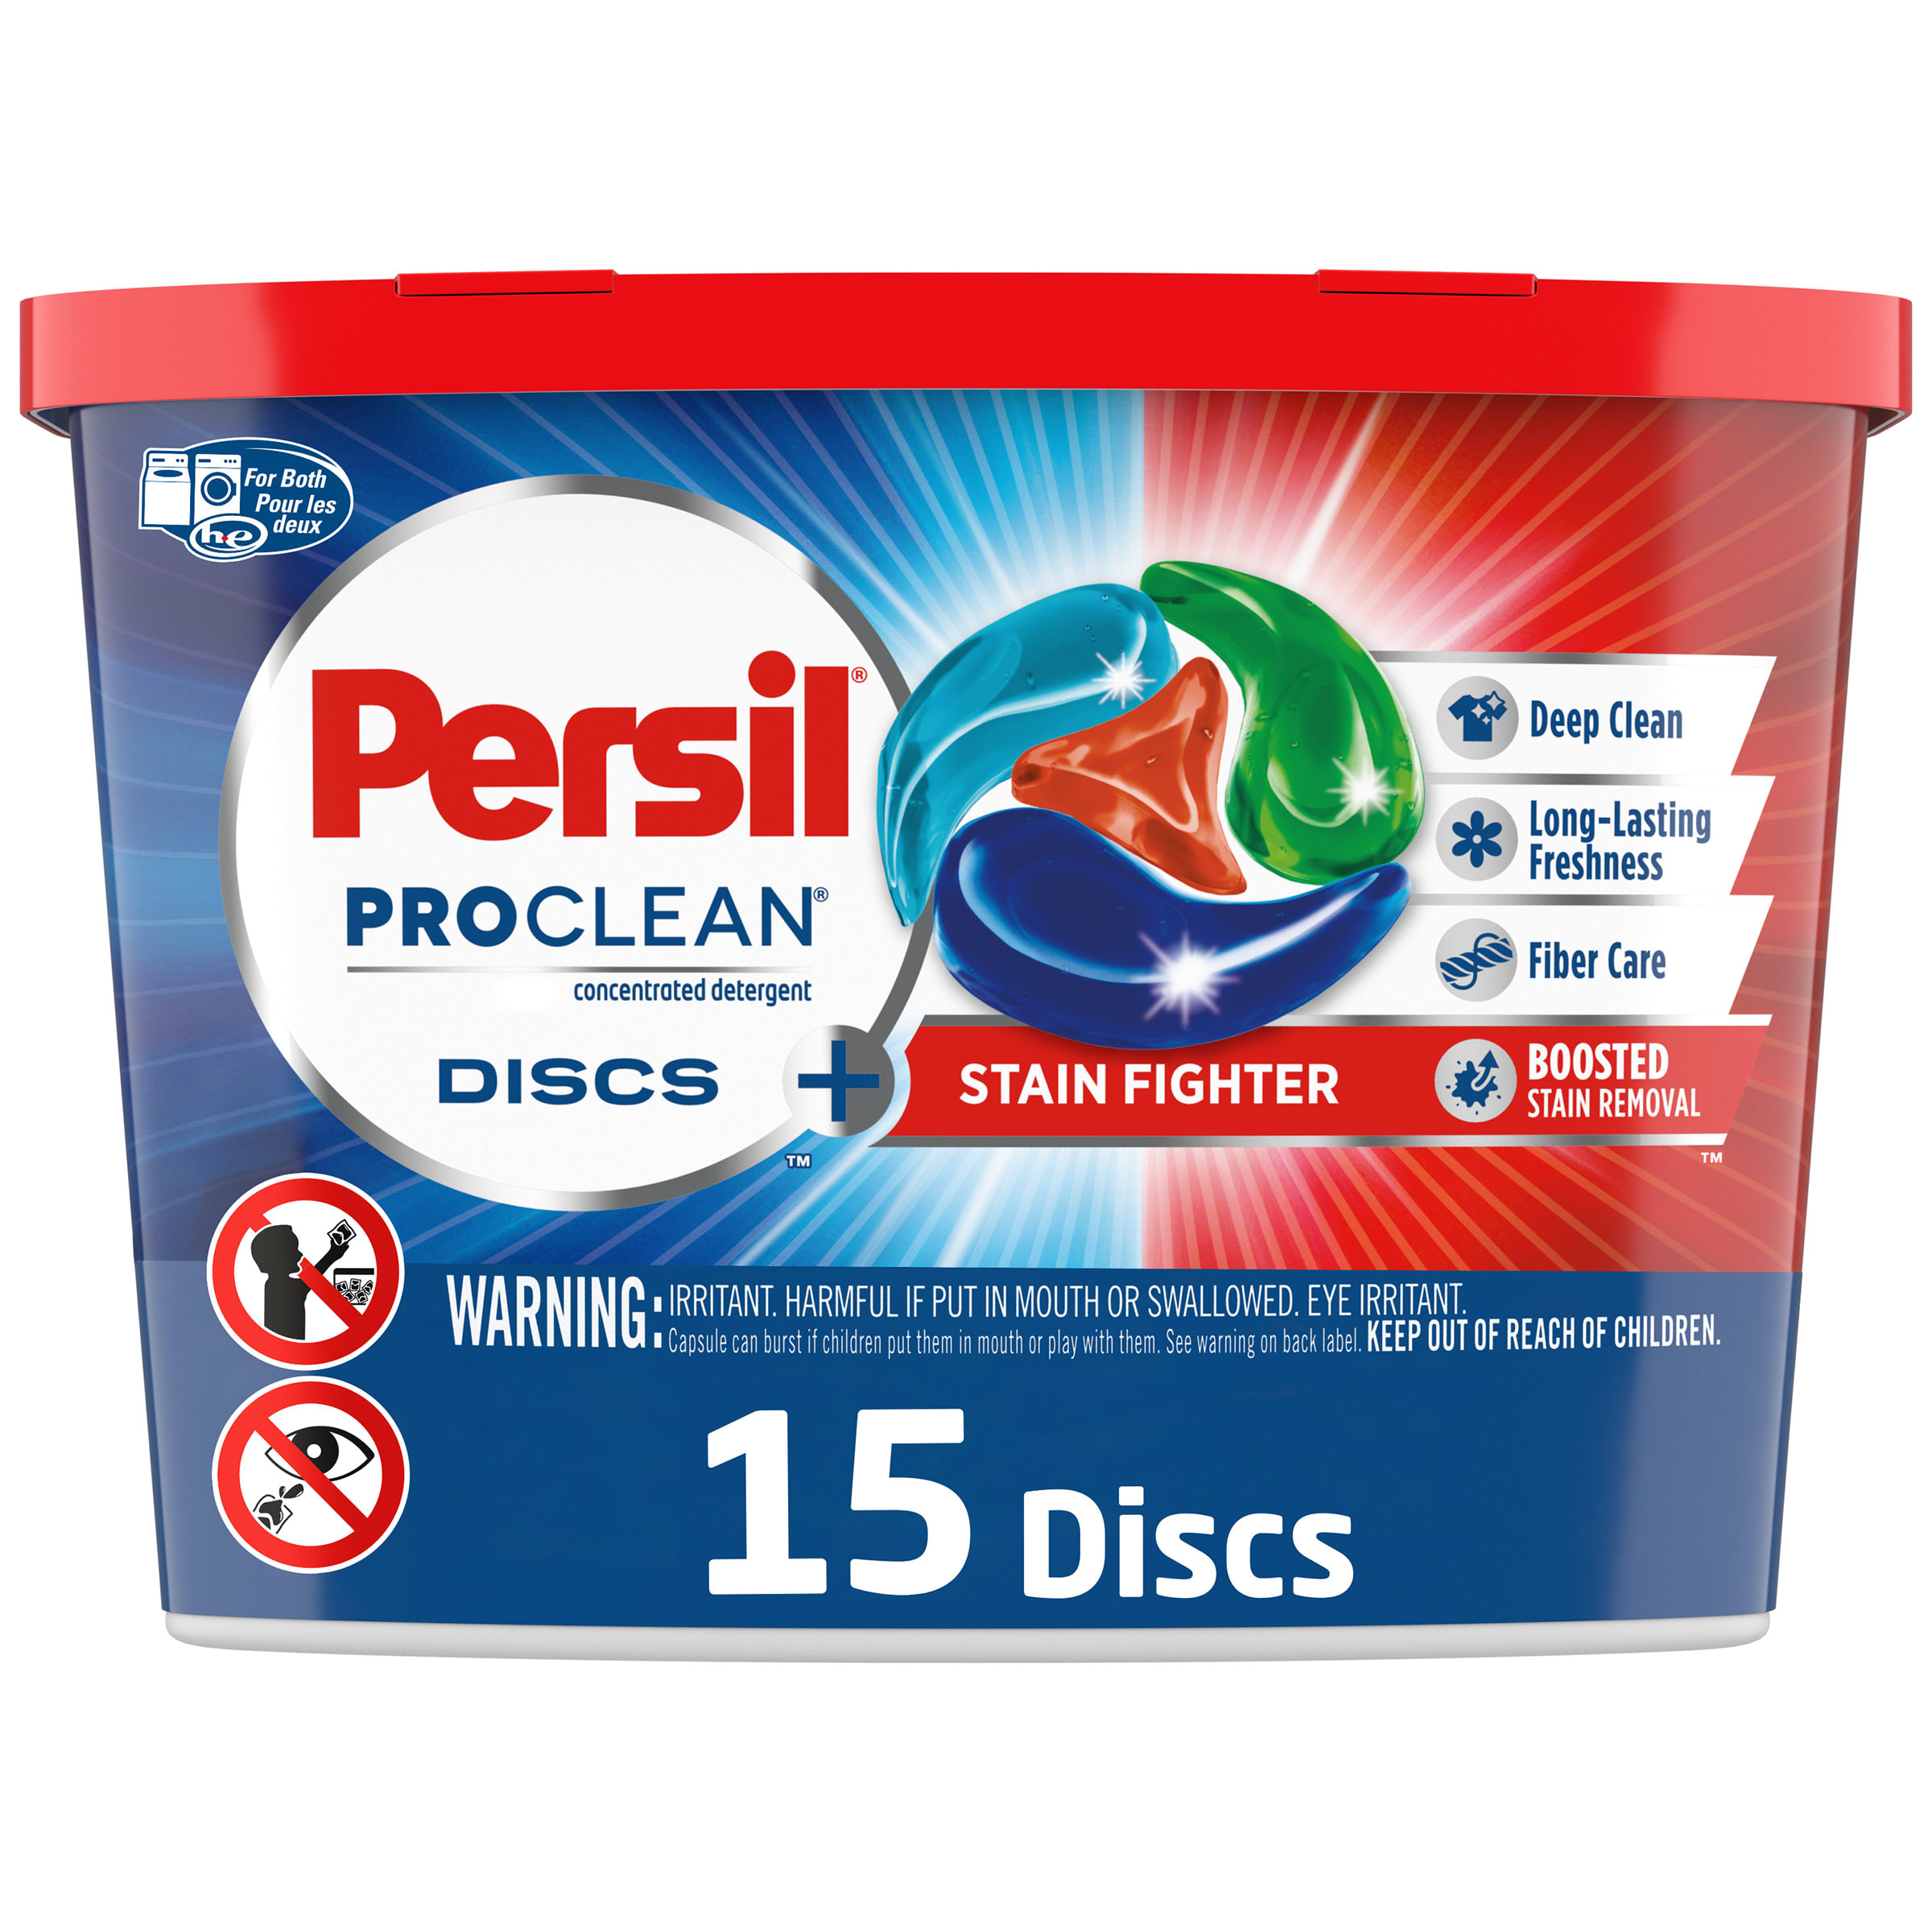 Persil Discs Laundry Detergent Pacs, Stain Fighter, 15 Count - image 1 of 11